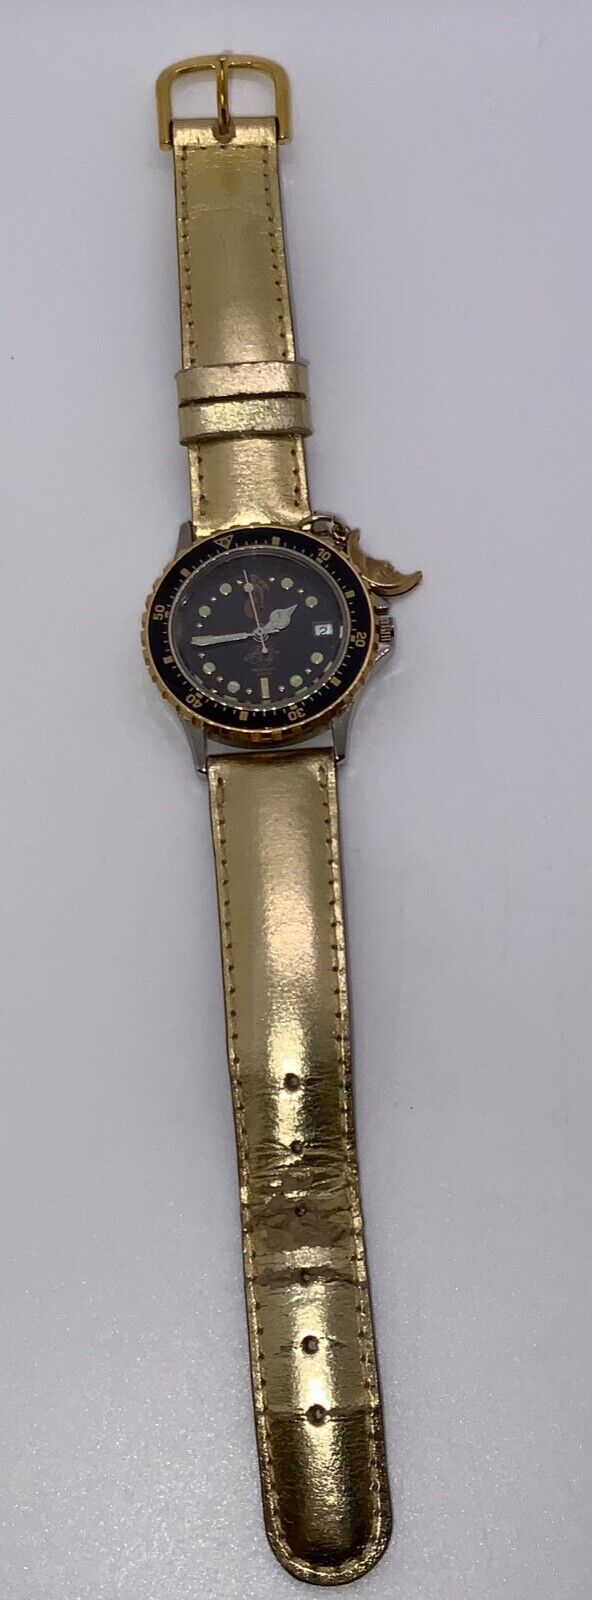 Kirk’s Folly Mermaid Watch With Gold Leather Band